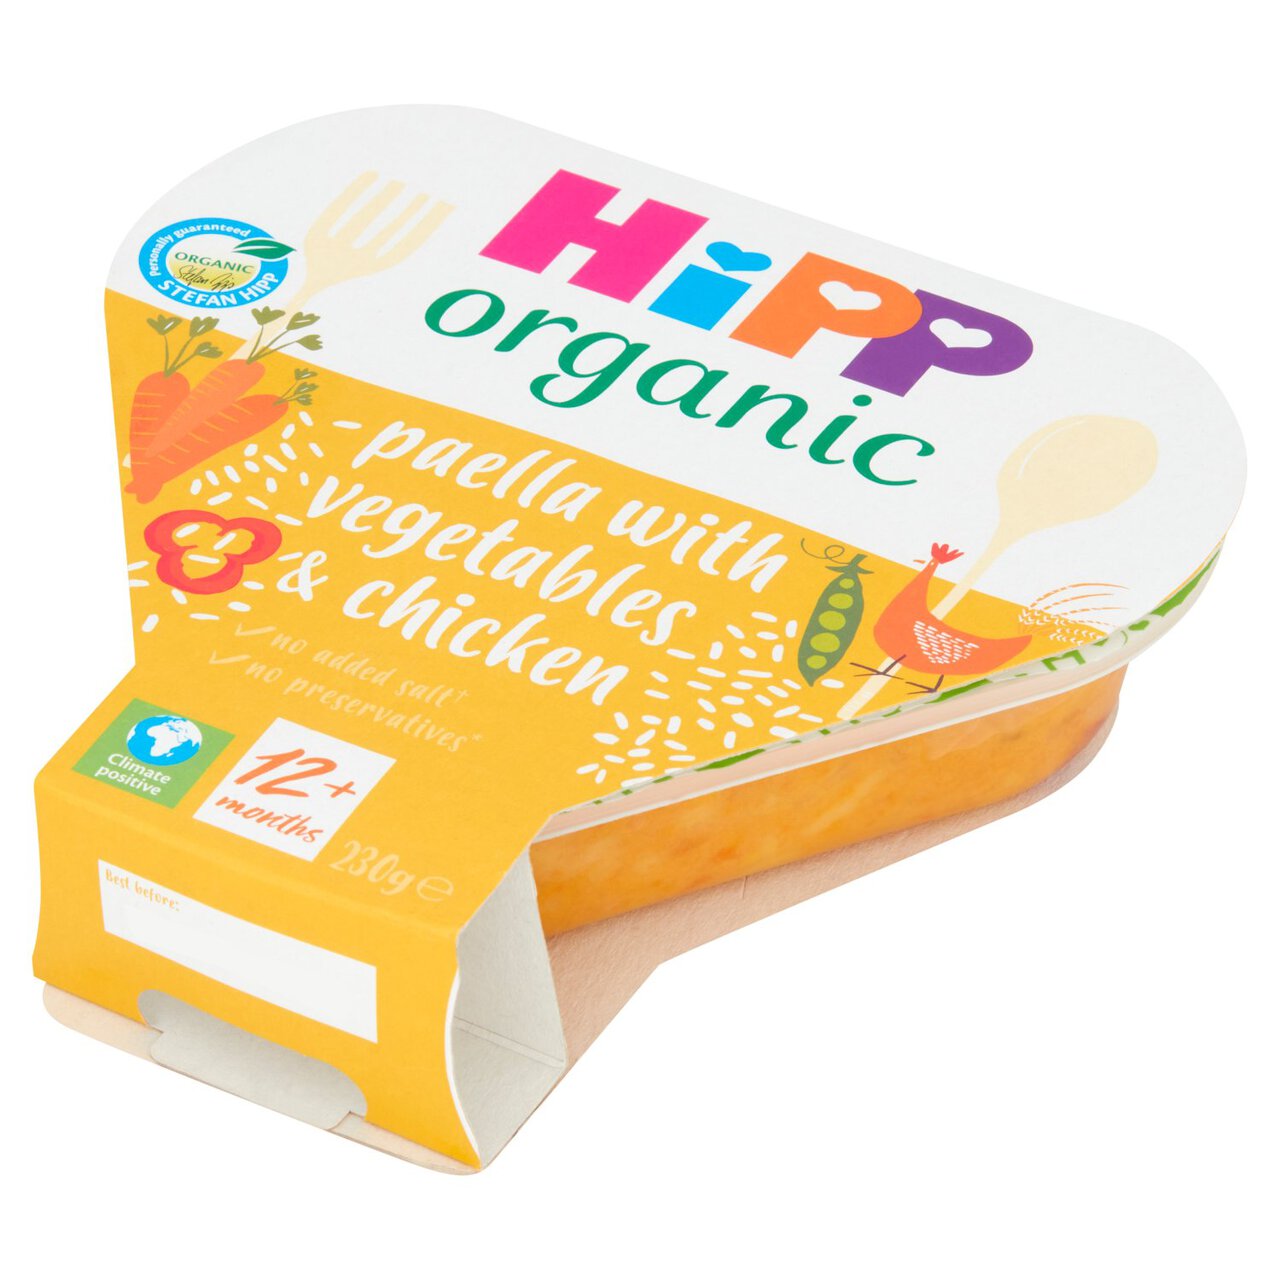 HiPP Organic Paella with Veg & Chicken Toddler Tray Meal 1-3 Years 230g